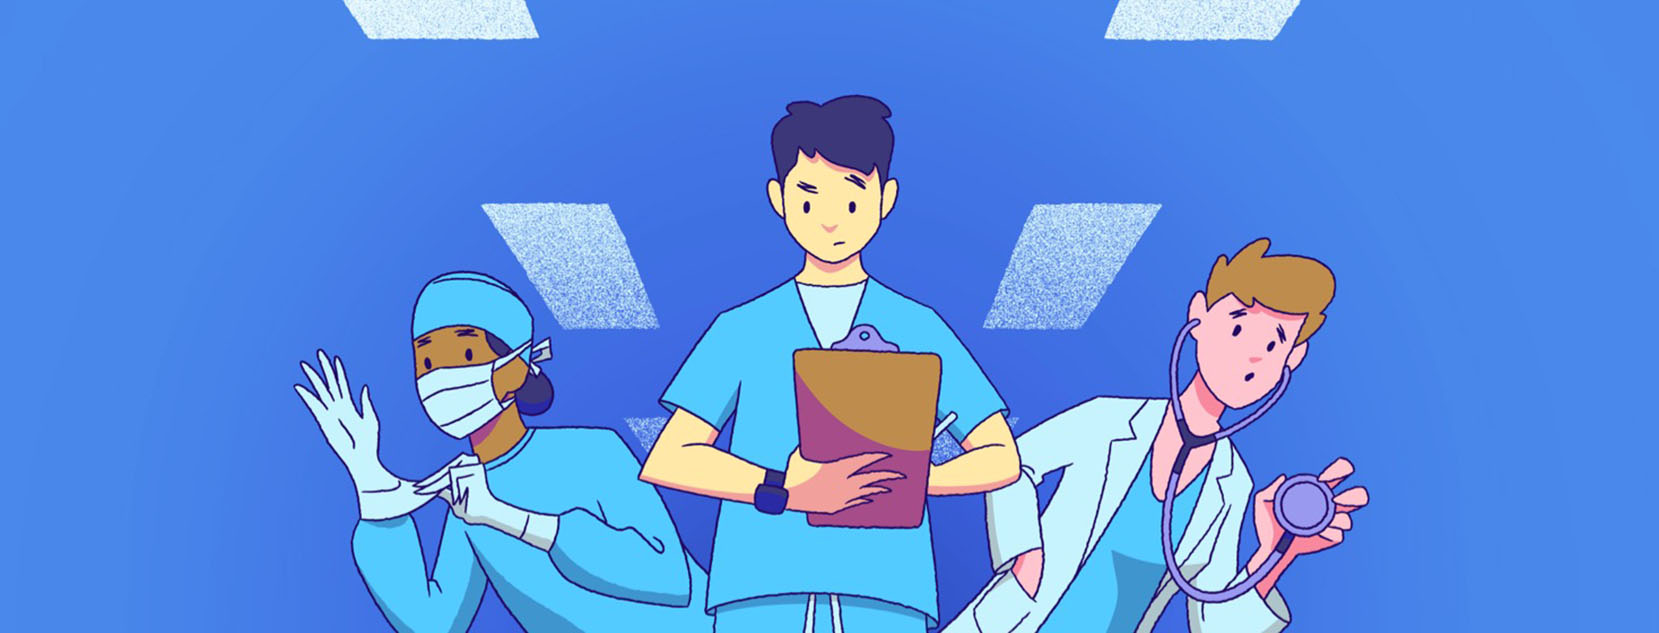 A nurse, surgeon, and doctor eagerly awaiting a patient under sterile hospital lighting